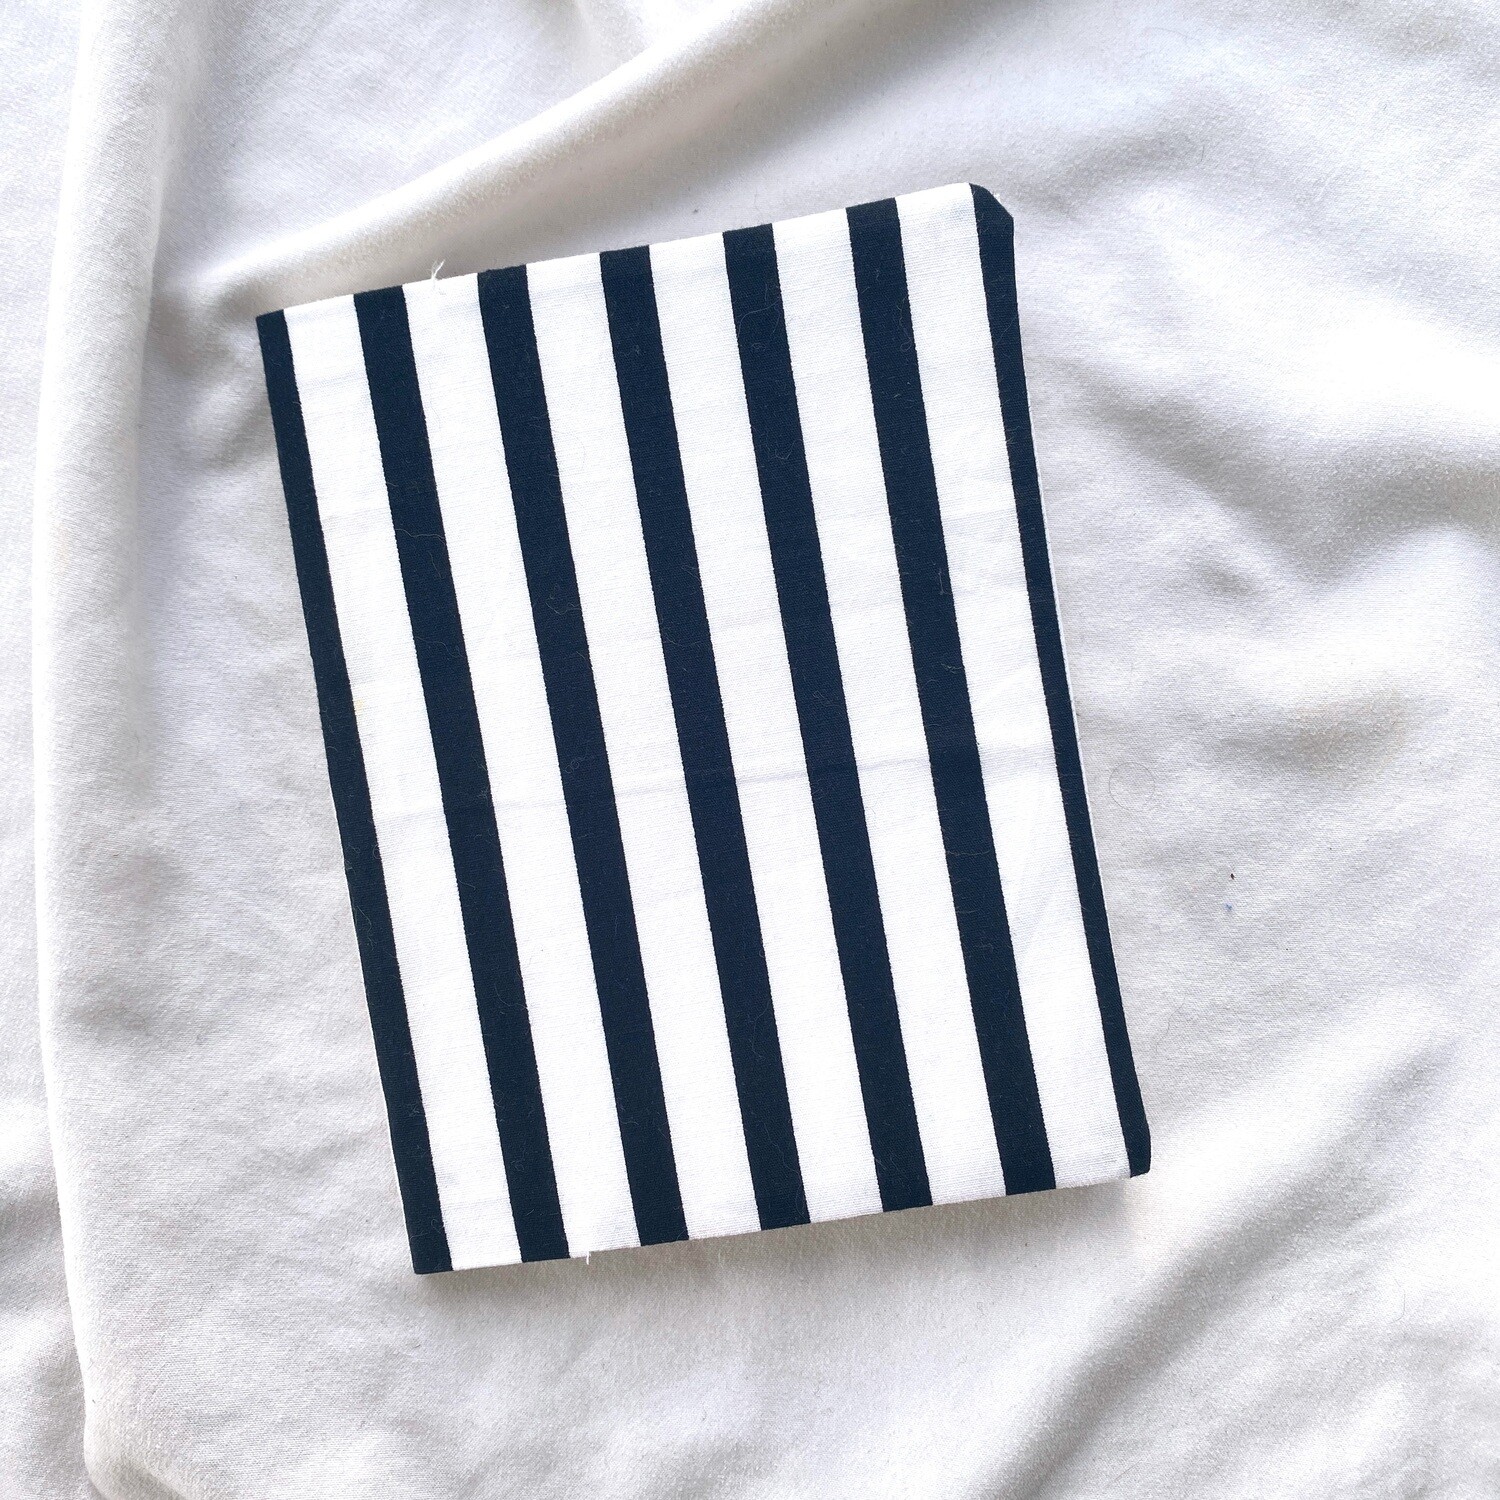 Handmade Journal, 4.5" x 5.5", Softcover, Envelope Pages, Black and White Stripes